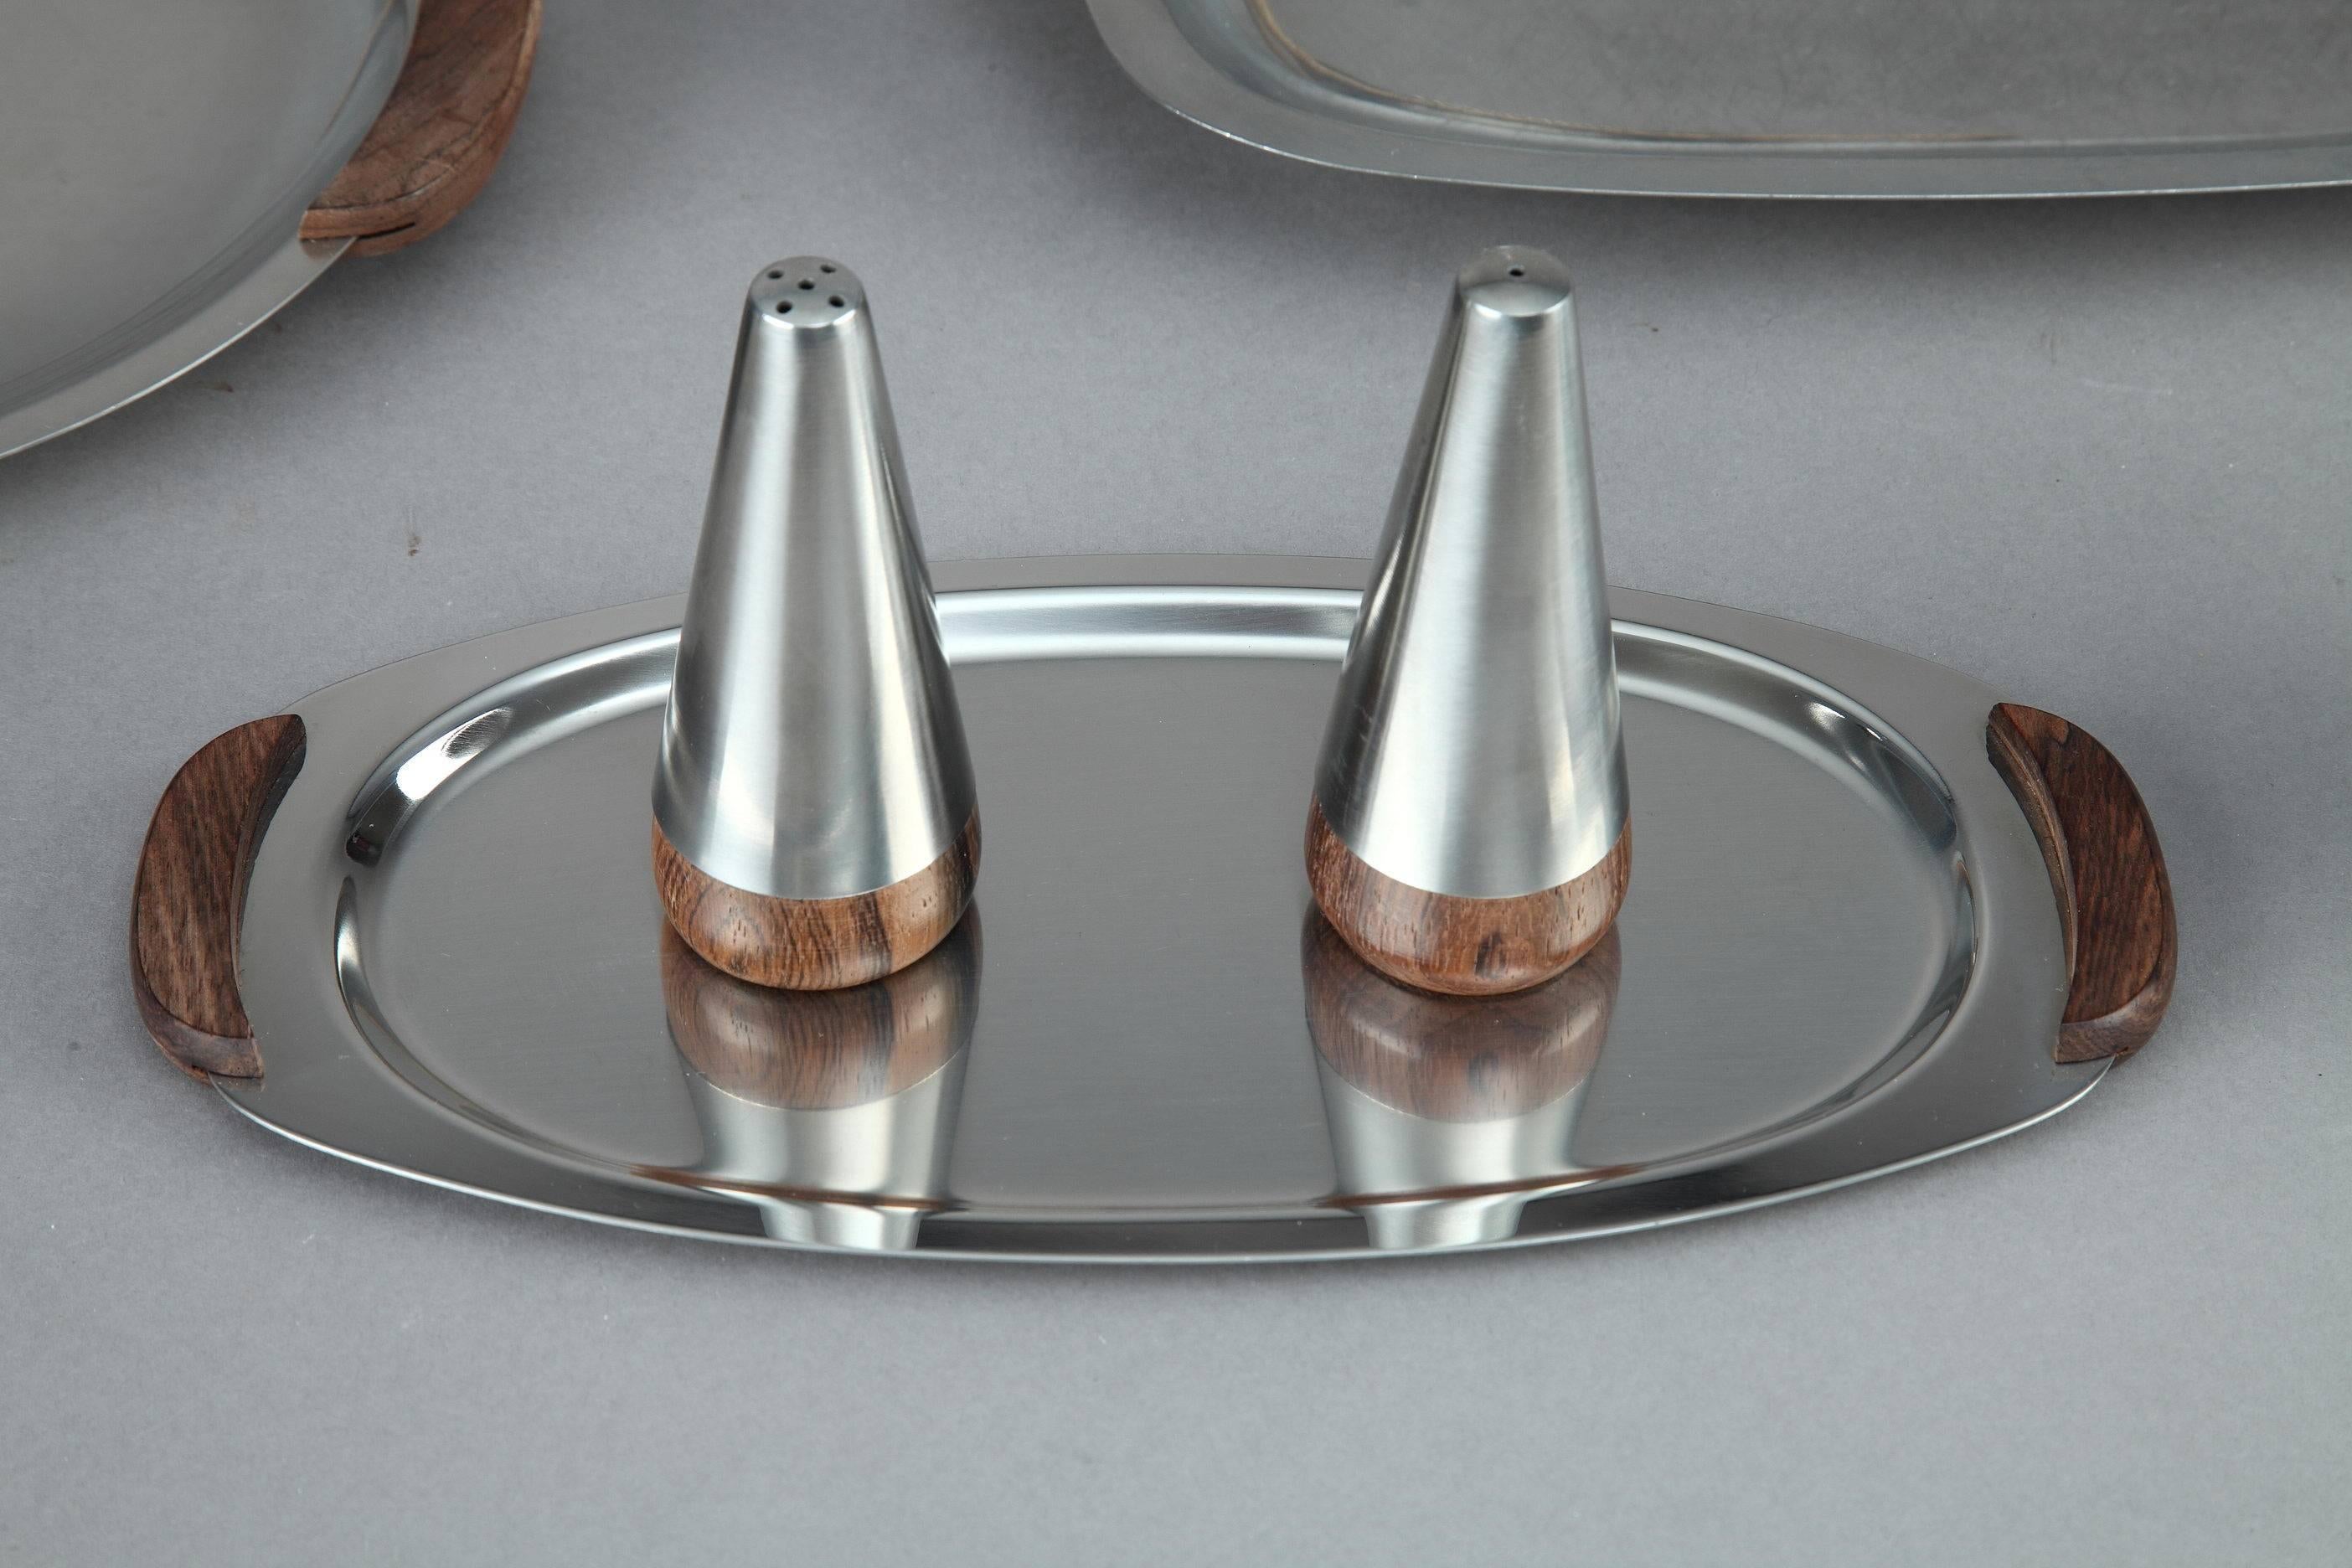 Stainless steel table service set from the 1960's. It is composed of: 3 deep platters, 3 smaller, shallow platters, 4 candlesticks, 3 pots (2 sauce, 1 milk), Salt and pepper shakers. The platters (two of which have covers) have wood handles. Three